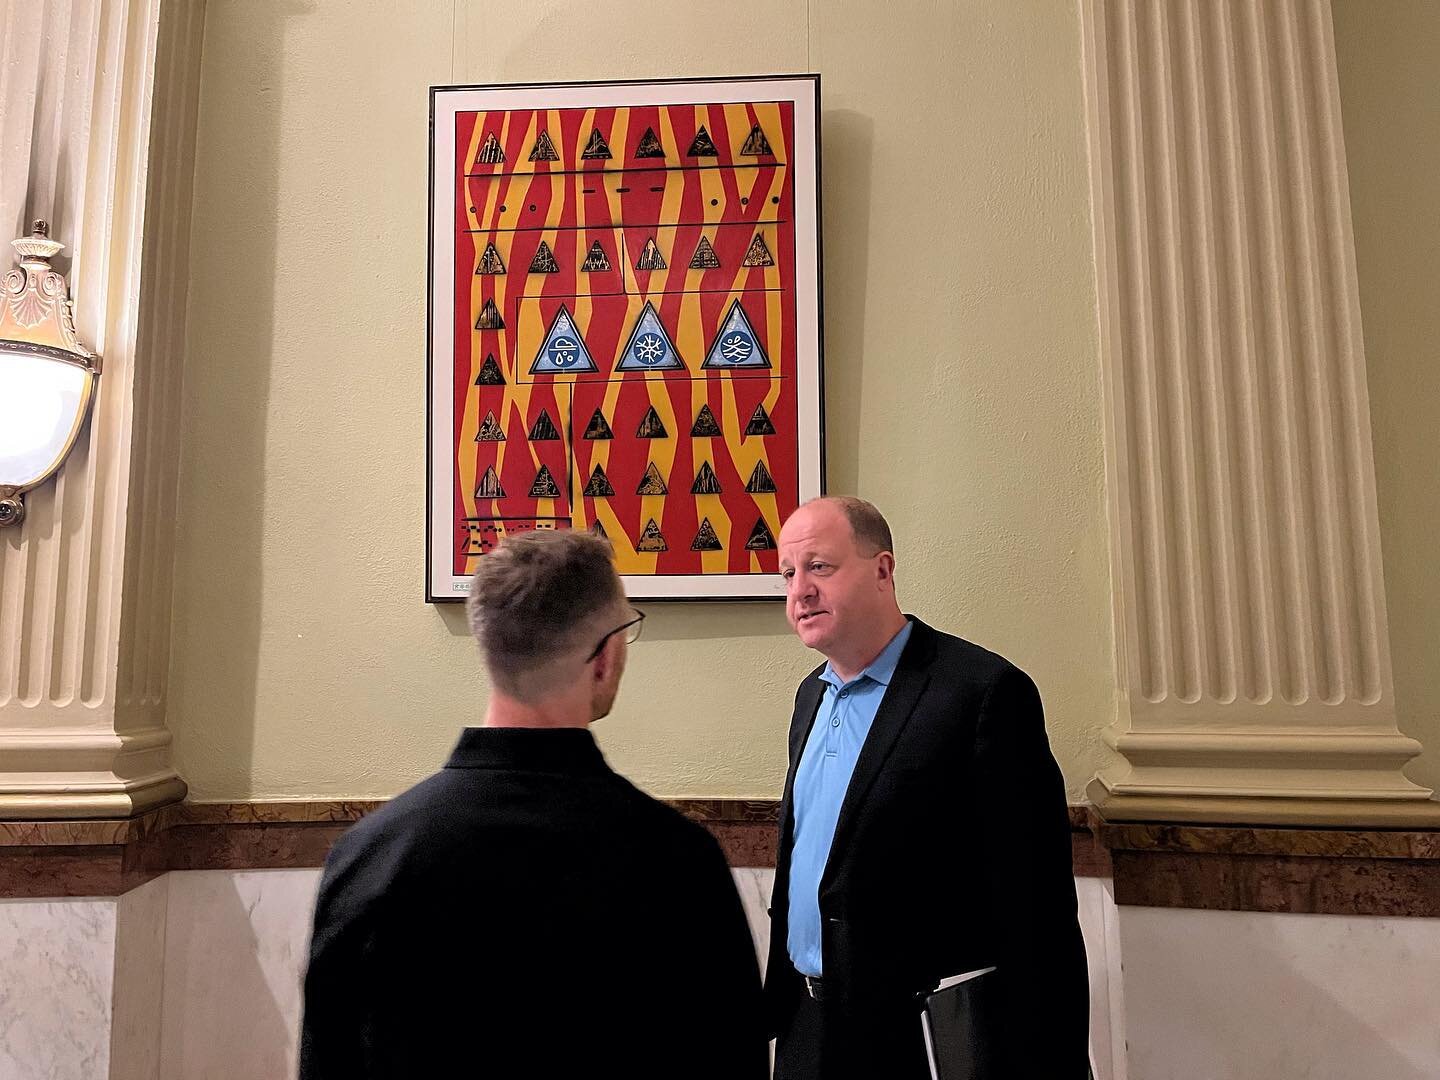 Just me and Governor Polis chatting about my art at the Denver Capitol. The exhibition opening was a hit and I am way pumped all the follows this amazing opportunity.